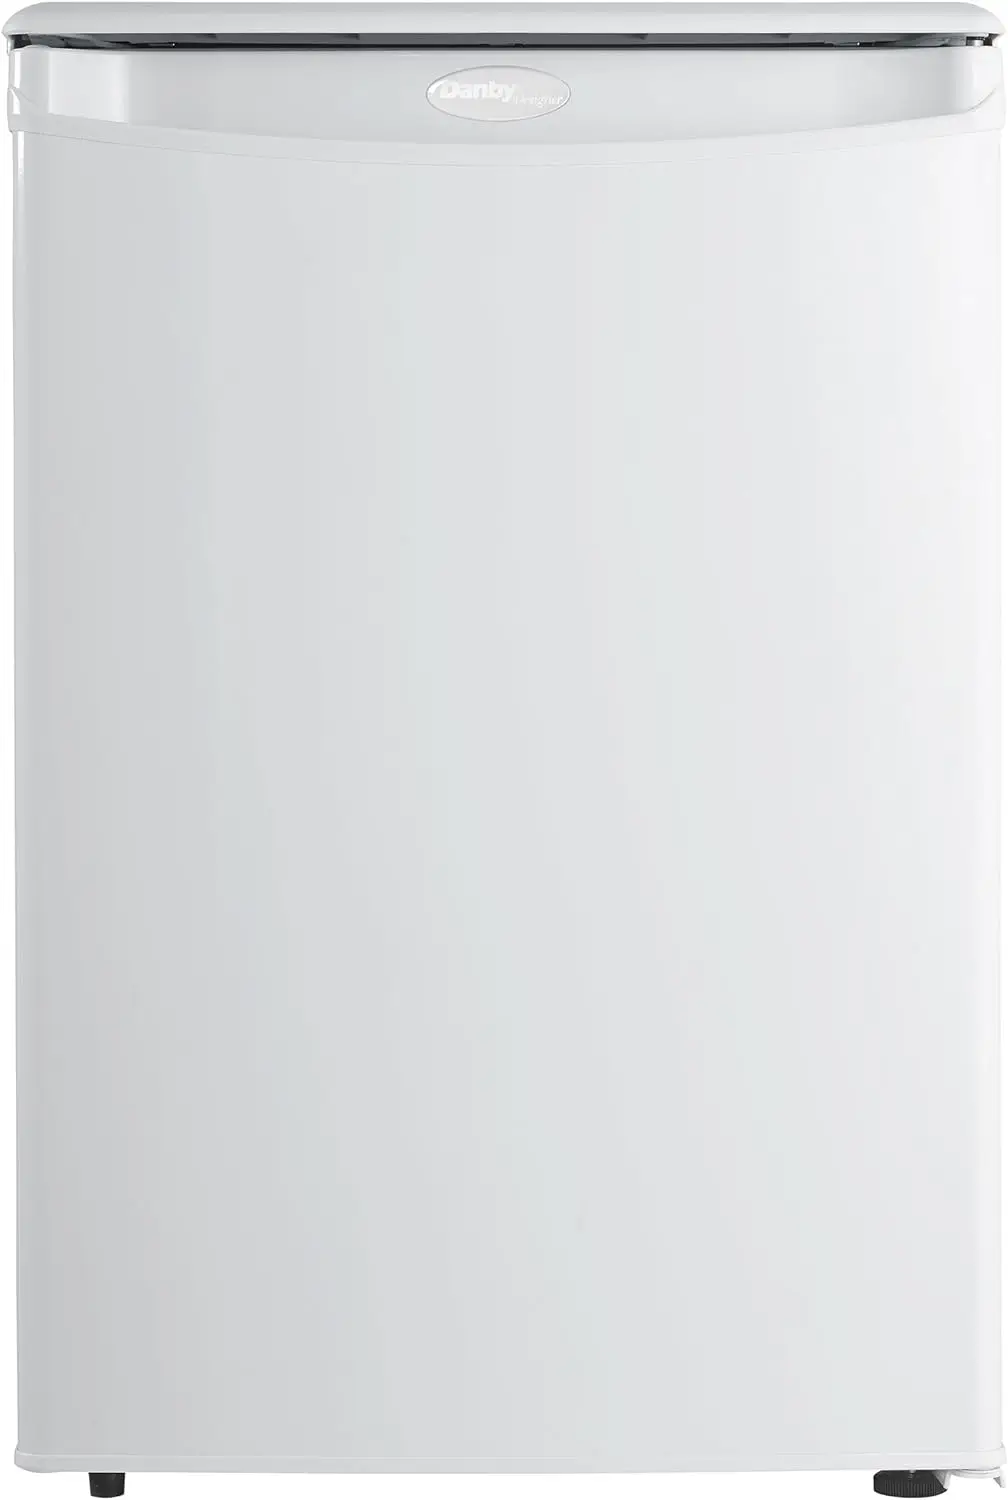 

DAR026A1WDD-6 2.6 Cu.Ft. Mini Fridge, Compact Refrigerator for Bedroom, Office, , countertop, E-Star Rated in White Mini deep fr